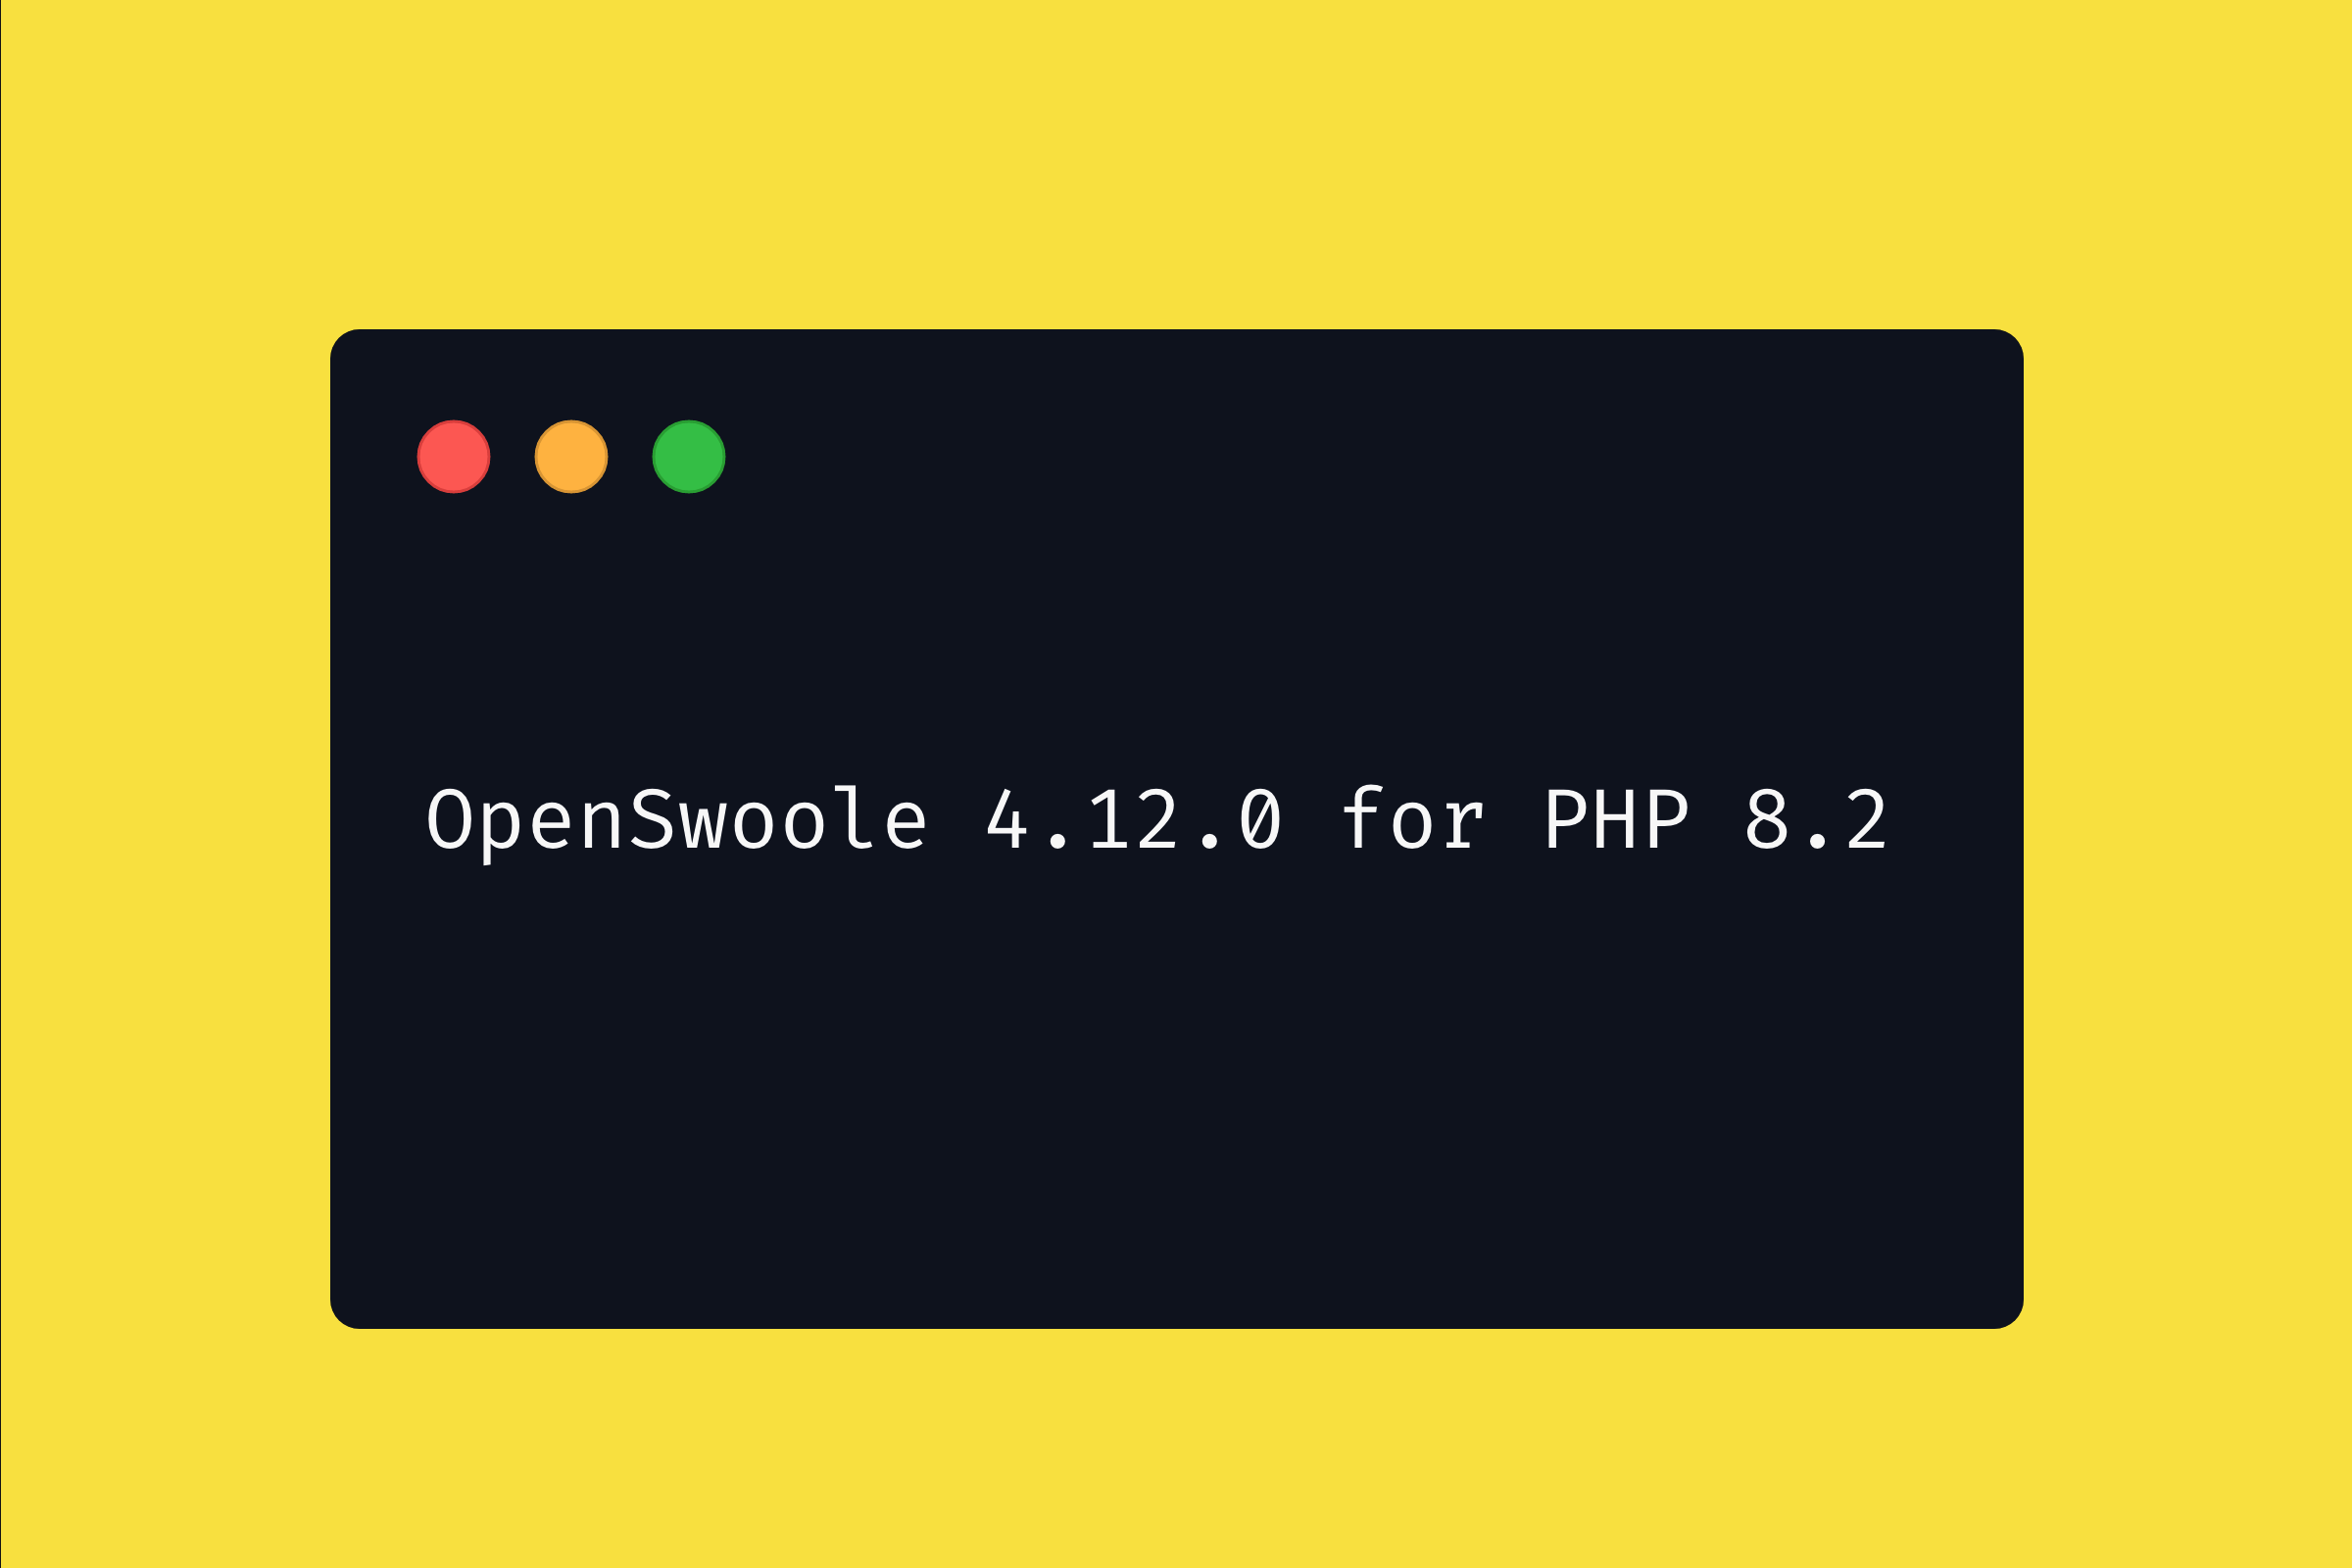 Official OpenSwoole version 4.12.0